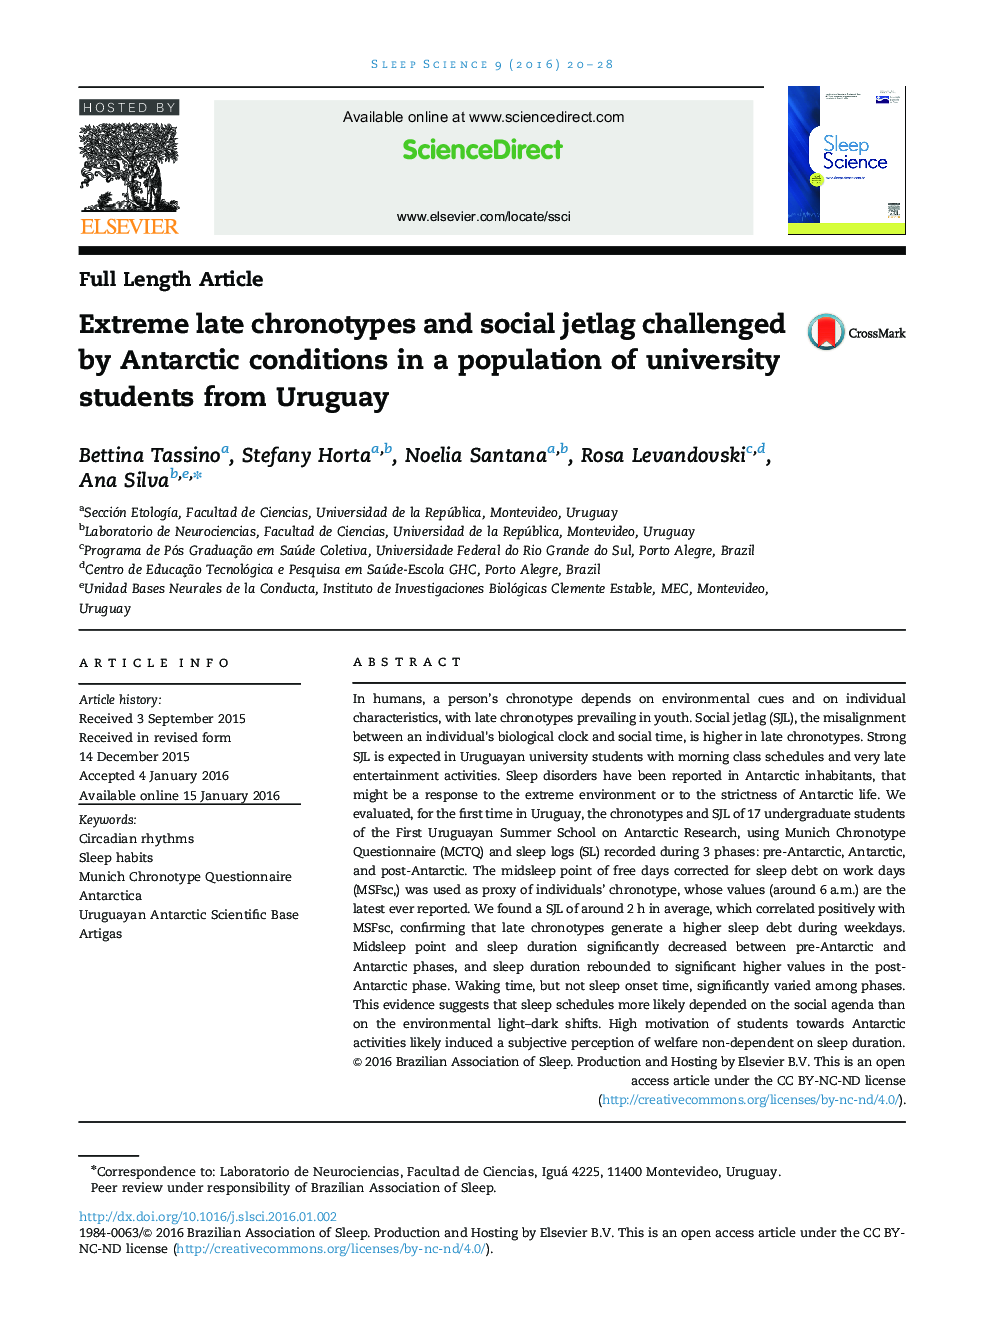 Extreme late chronotypes and social jetlag challenged by Antarctic conditions in a population of university students from Uruguay 